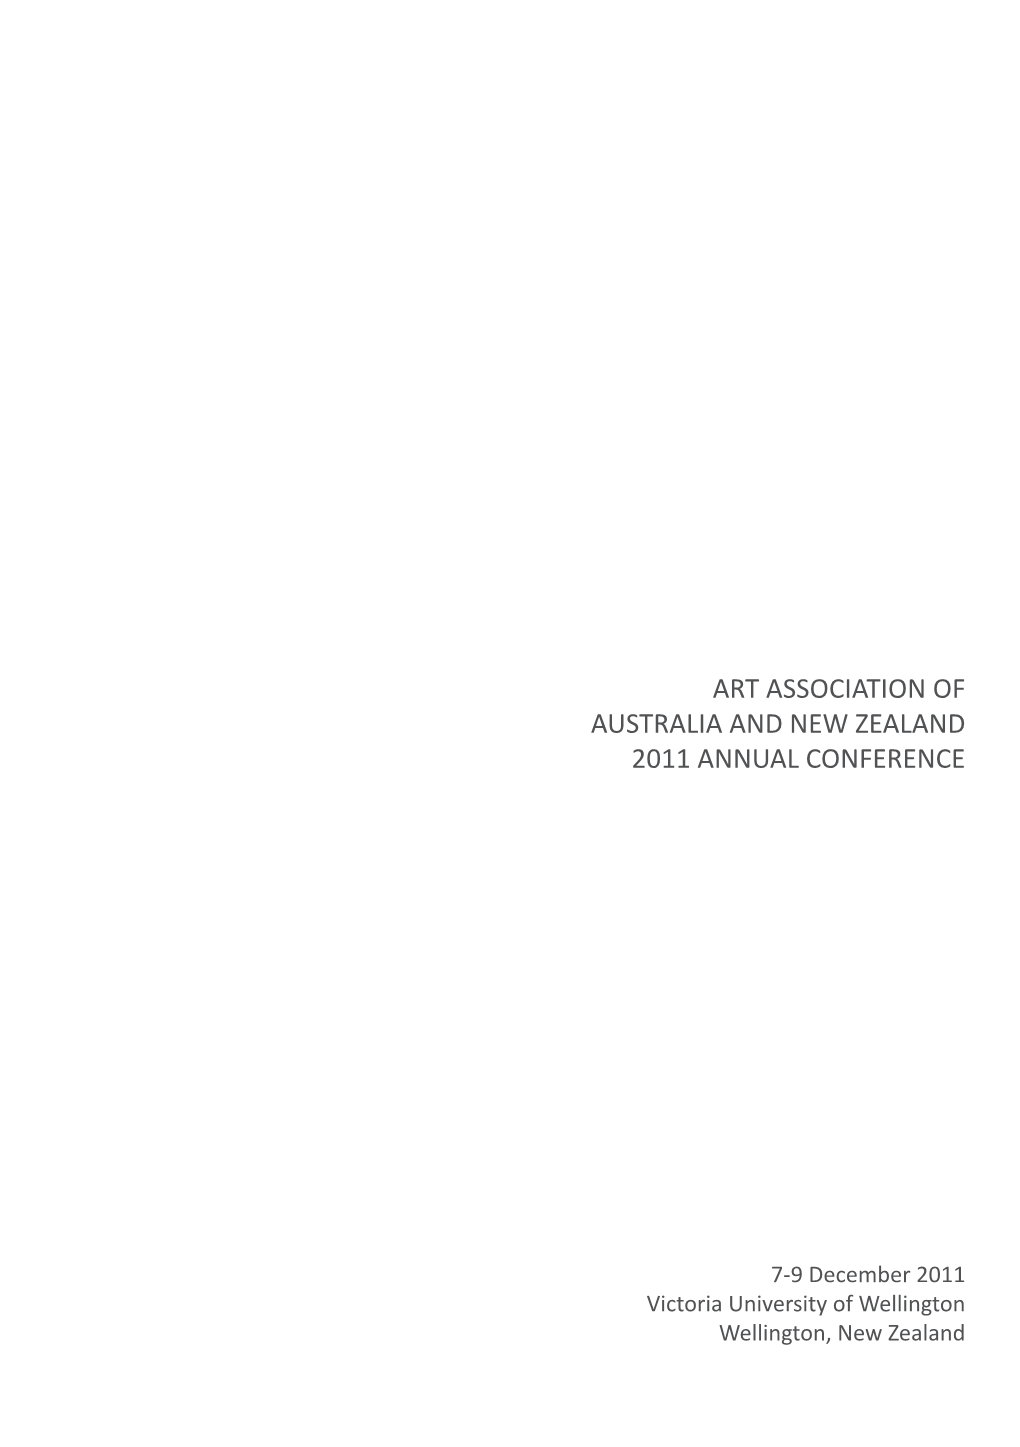 Art Association of Australia and New Zealand 2011 Annual Conference